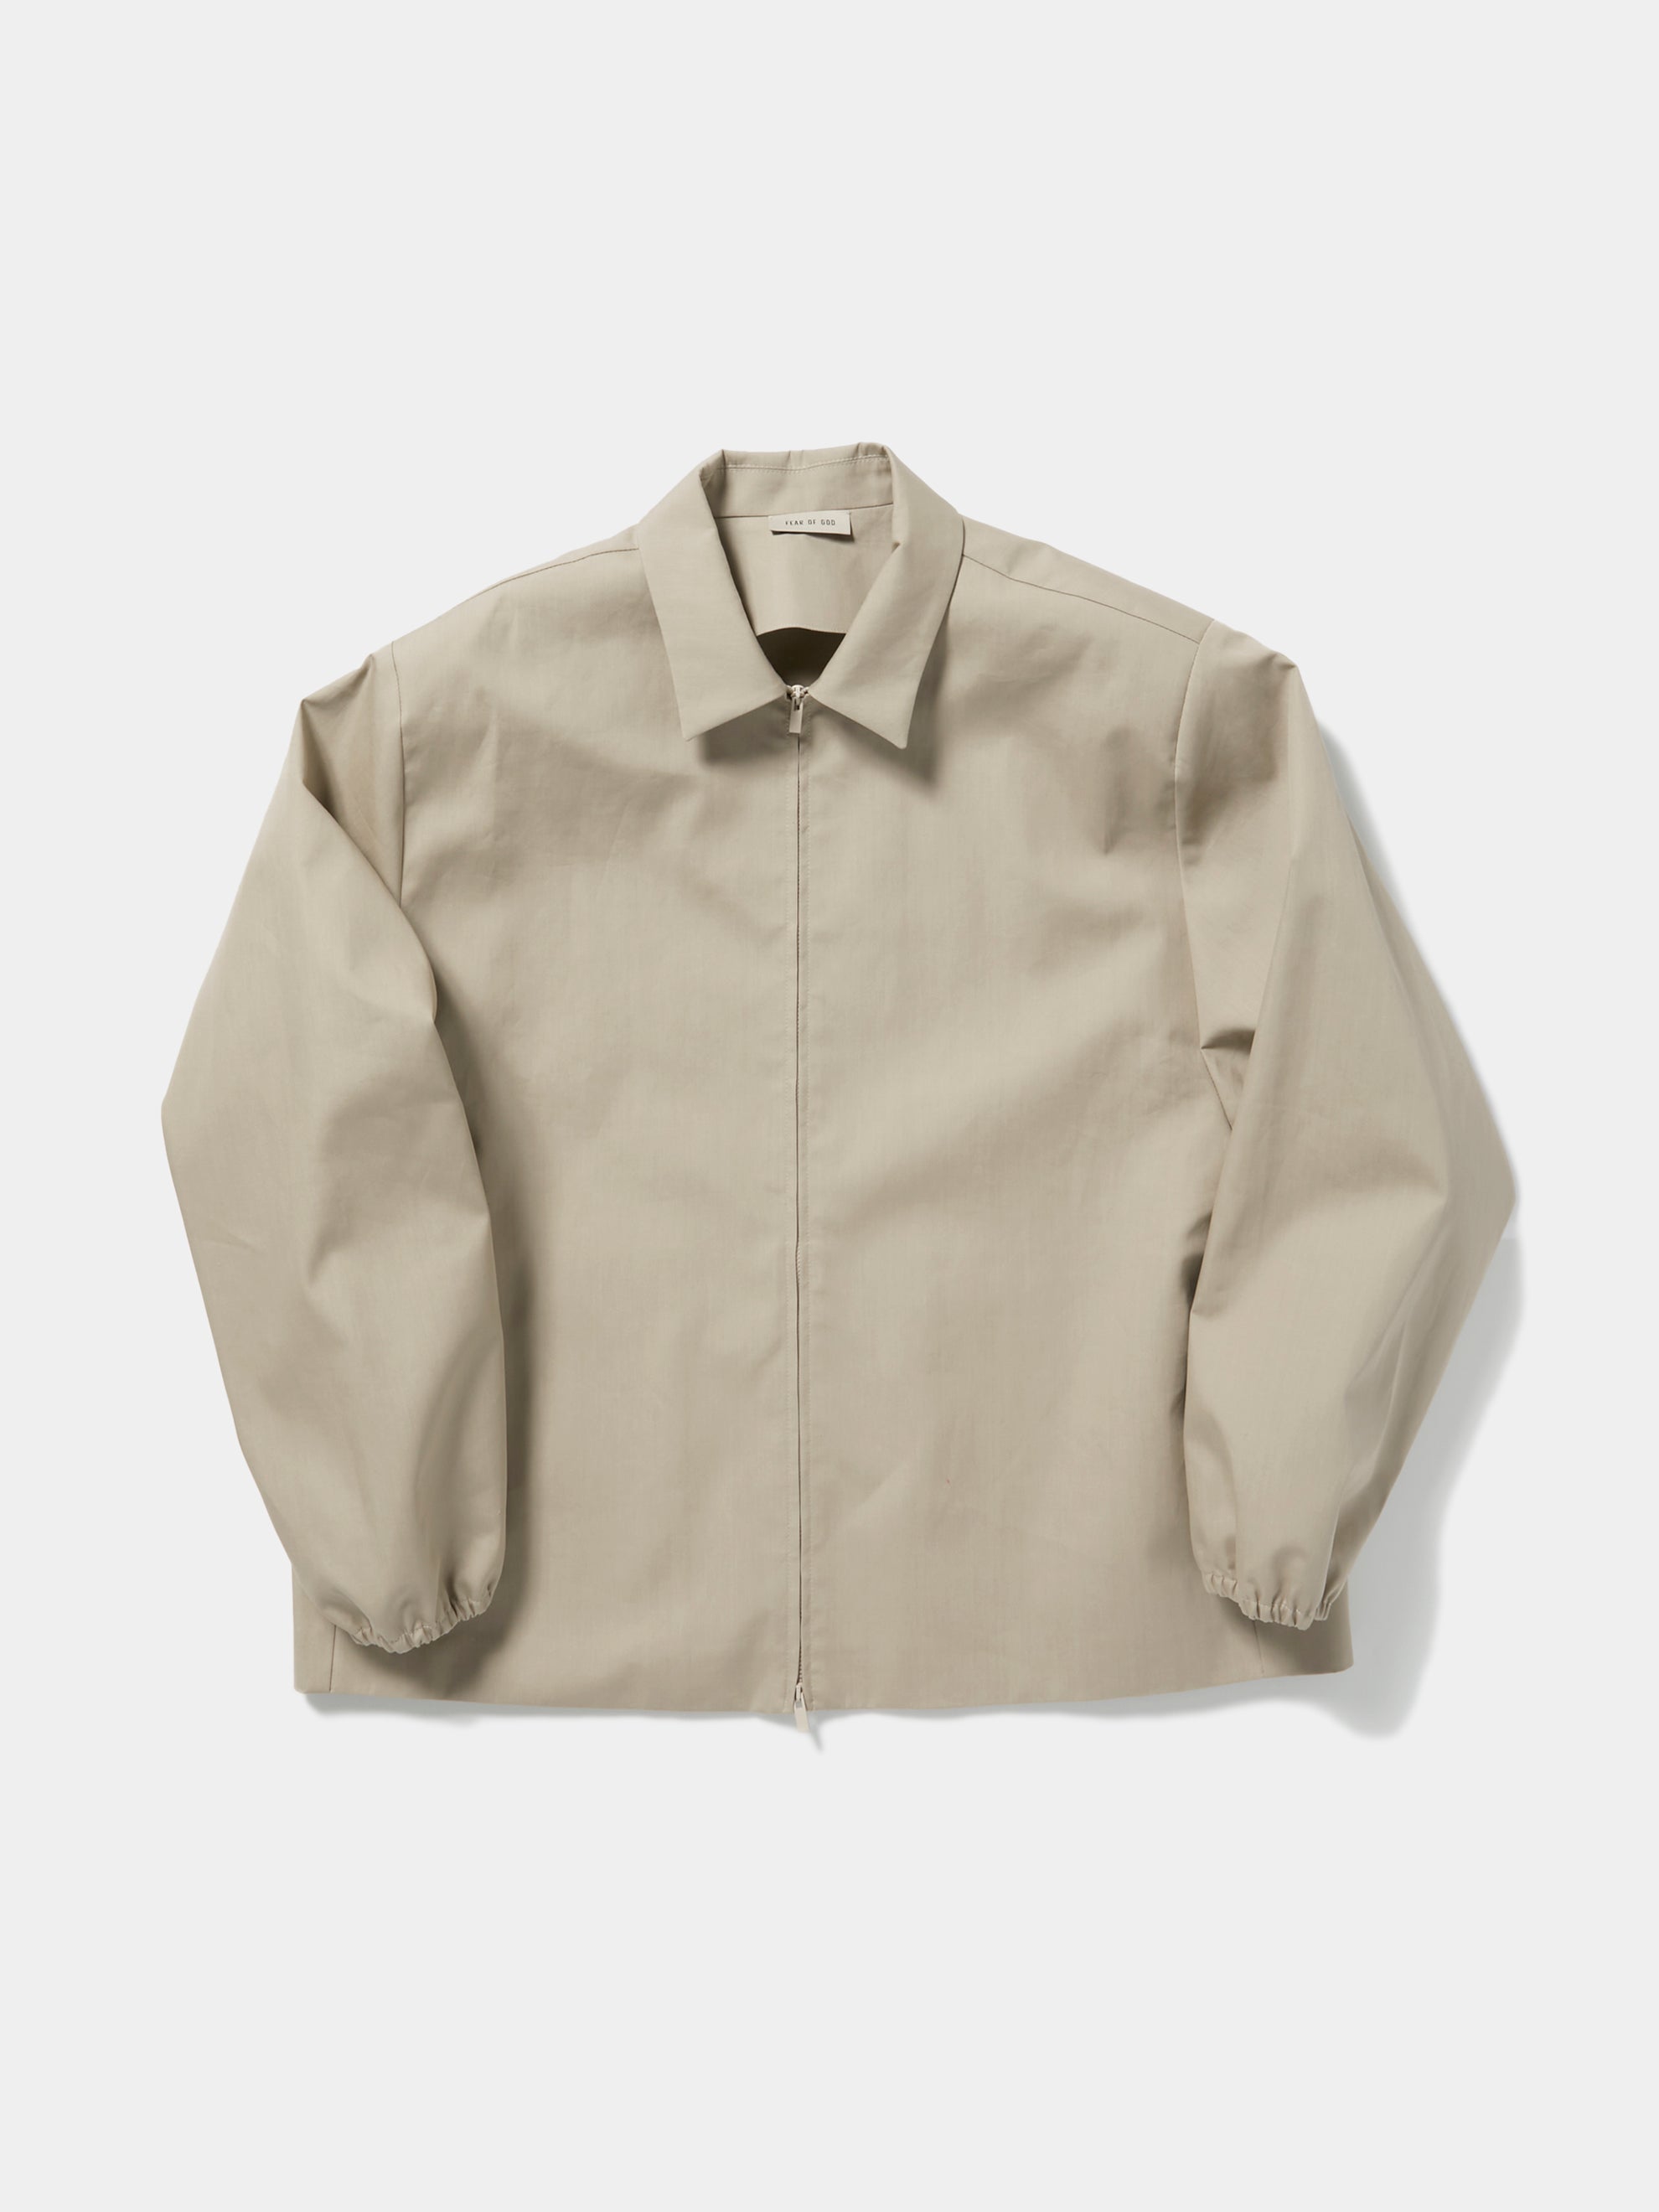 Buy Fear of God Eternal Cotton Work Jacket Online at UNION LOS ANGELES